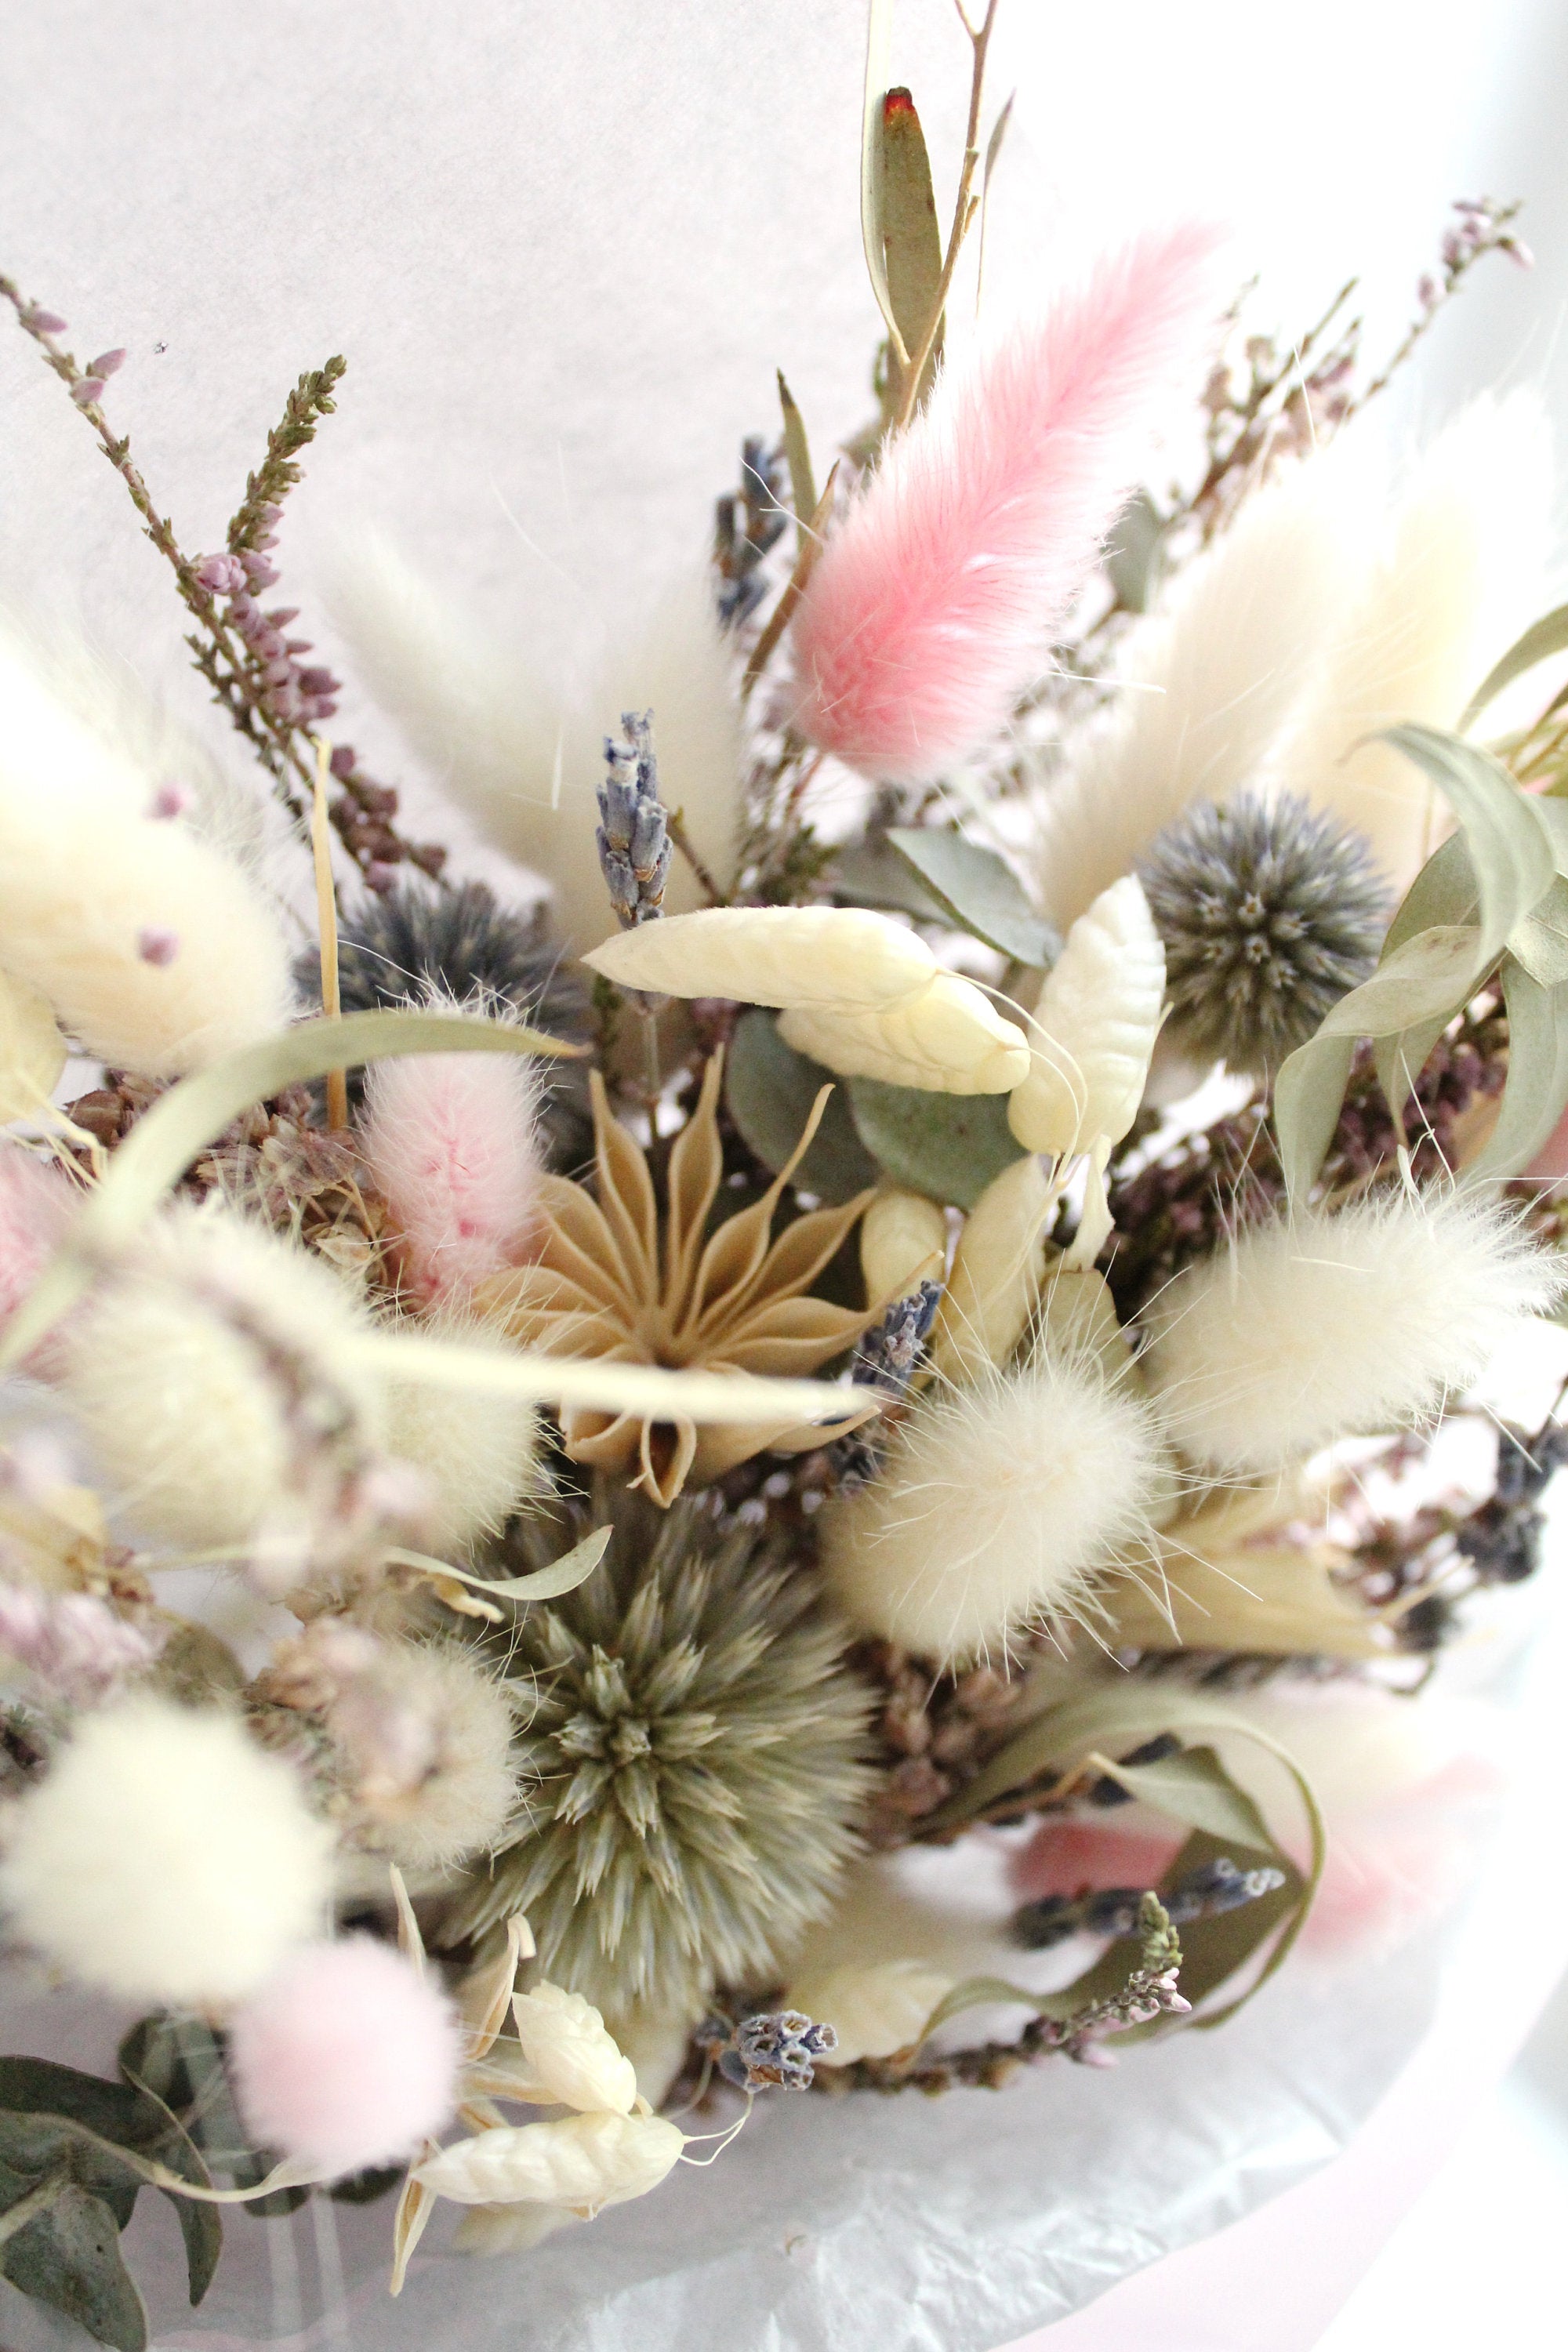 Bride or bridesmaid wedding bouquet of dried flowers in green and pink colours